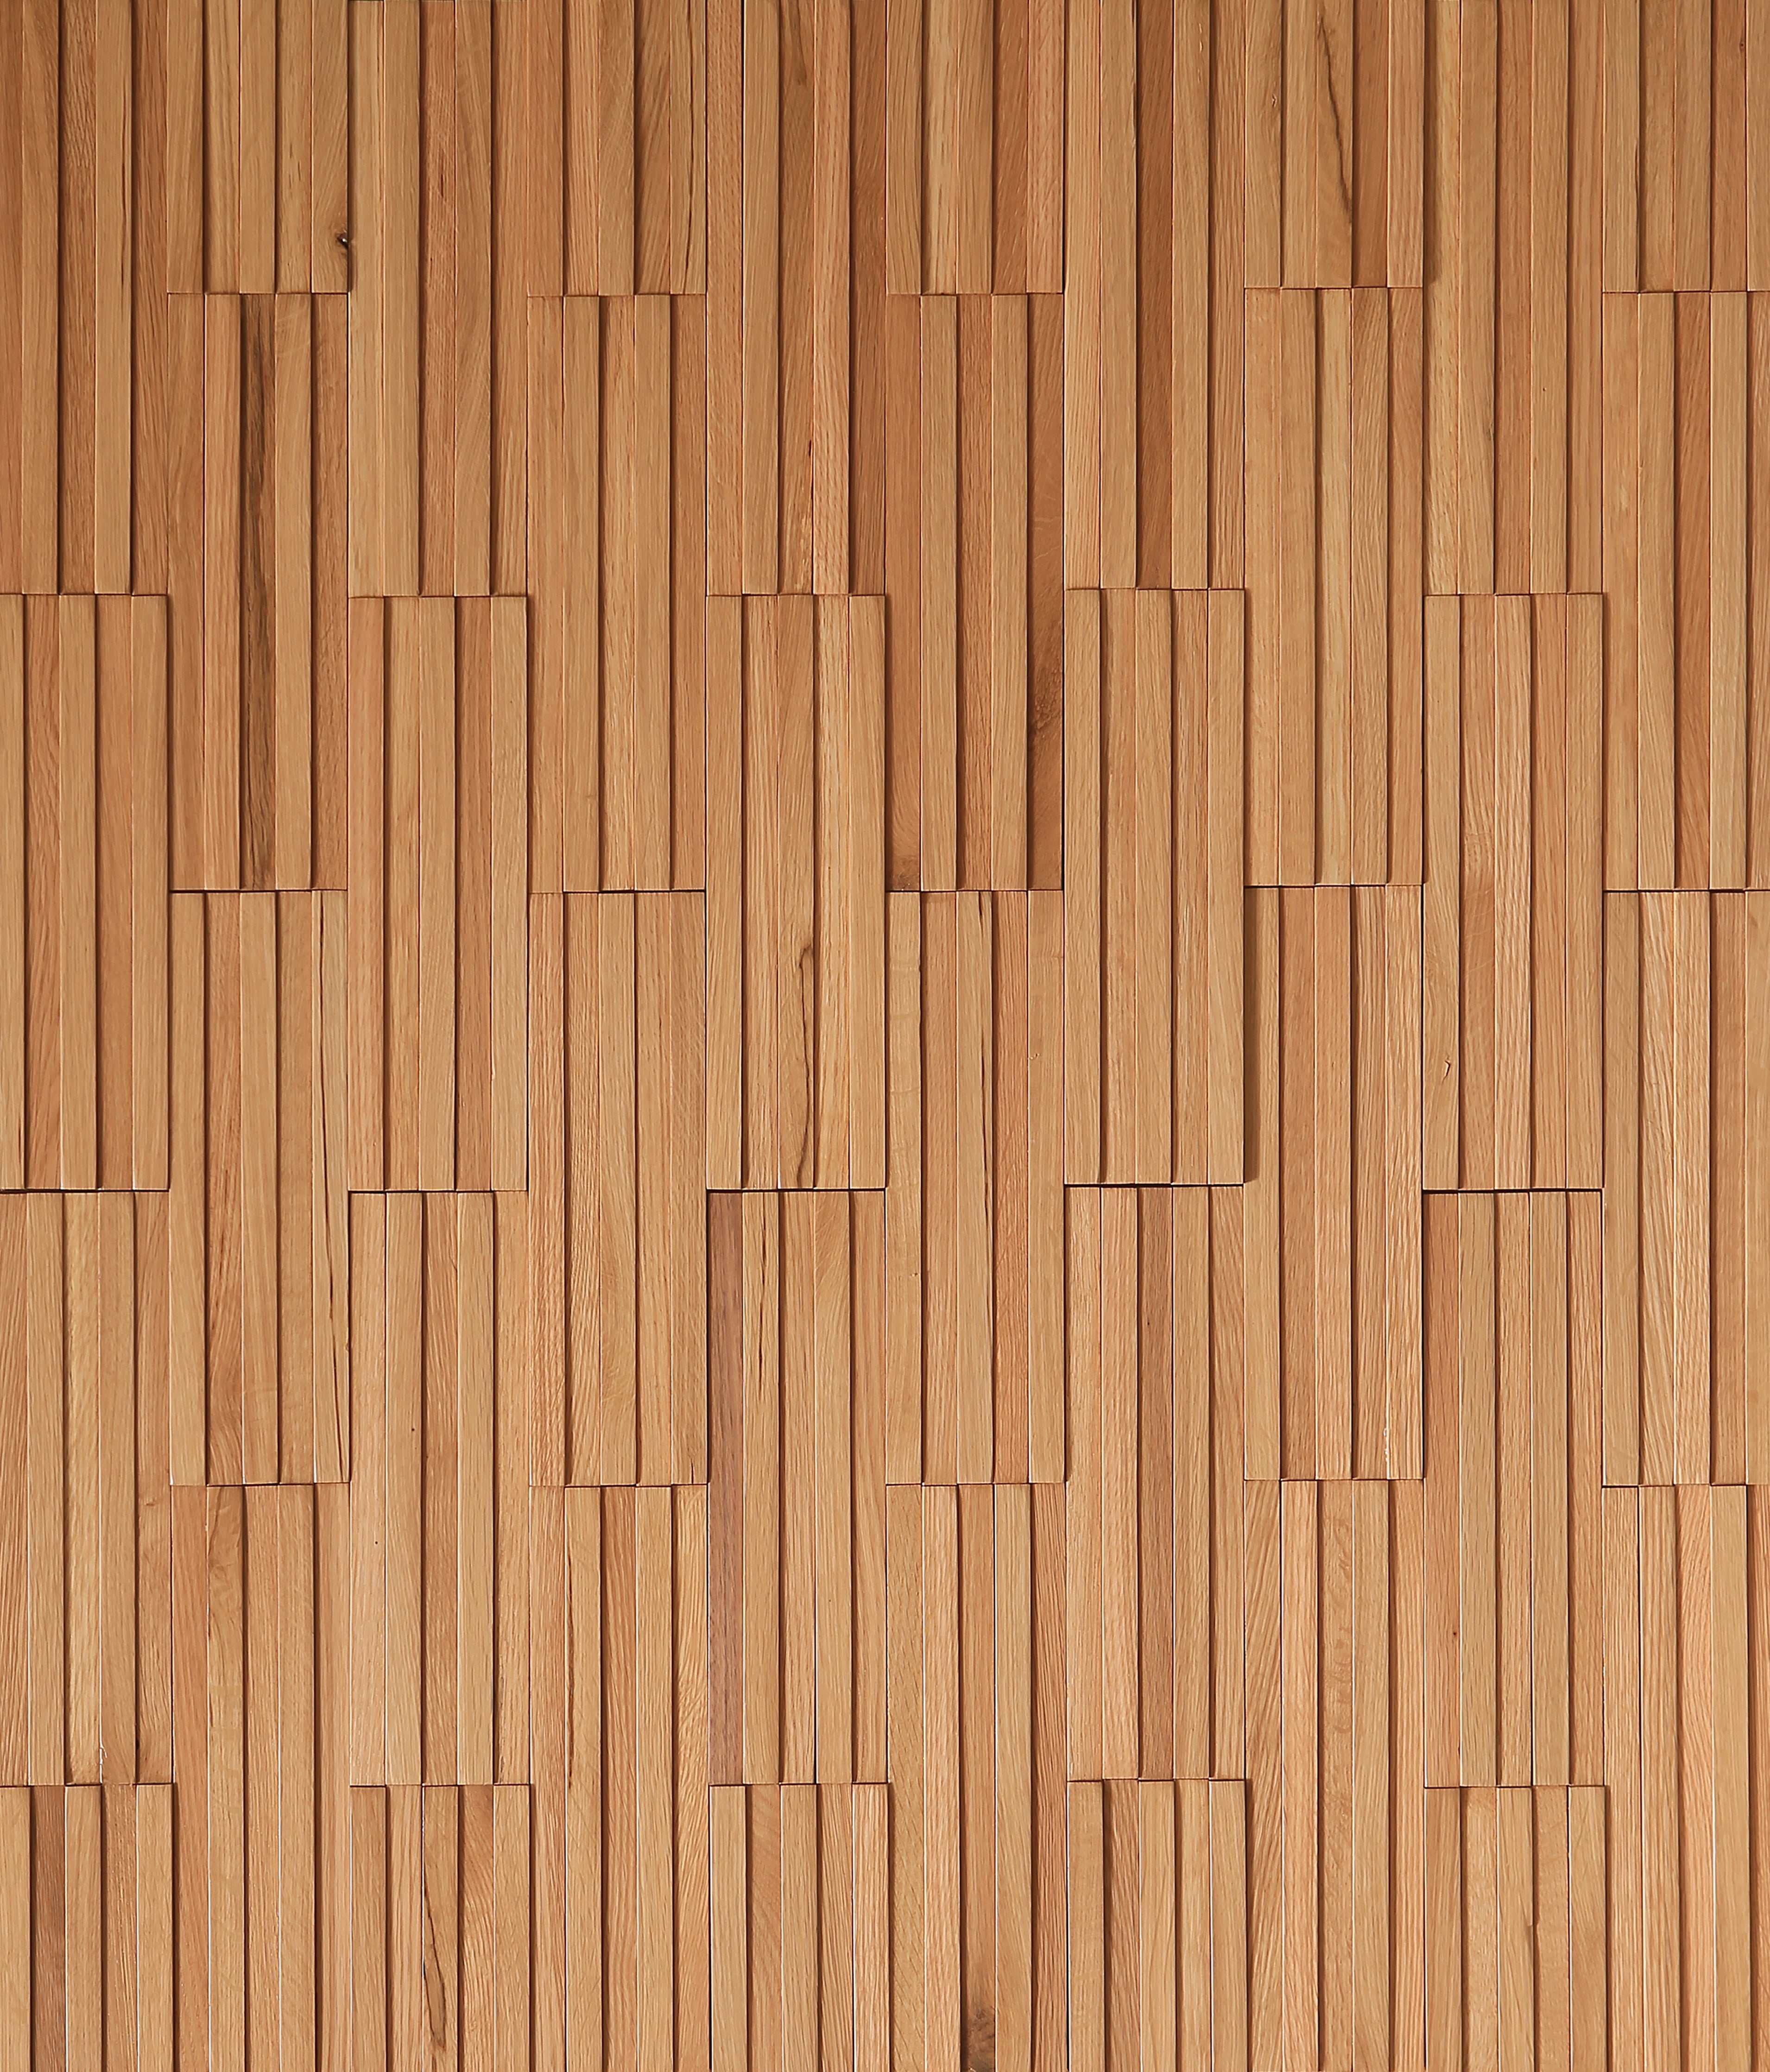 duchateau inceptiv parallels golden oak oak three dimensional wall natural wood panel conversion varnish for interior use distributed by surface group international